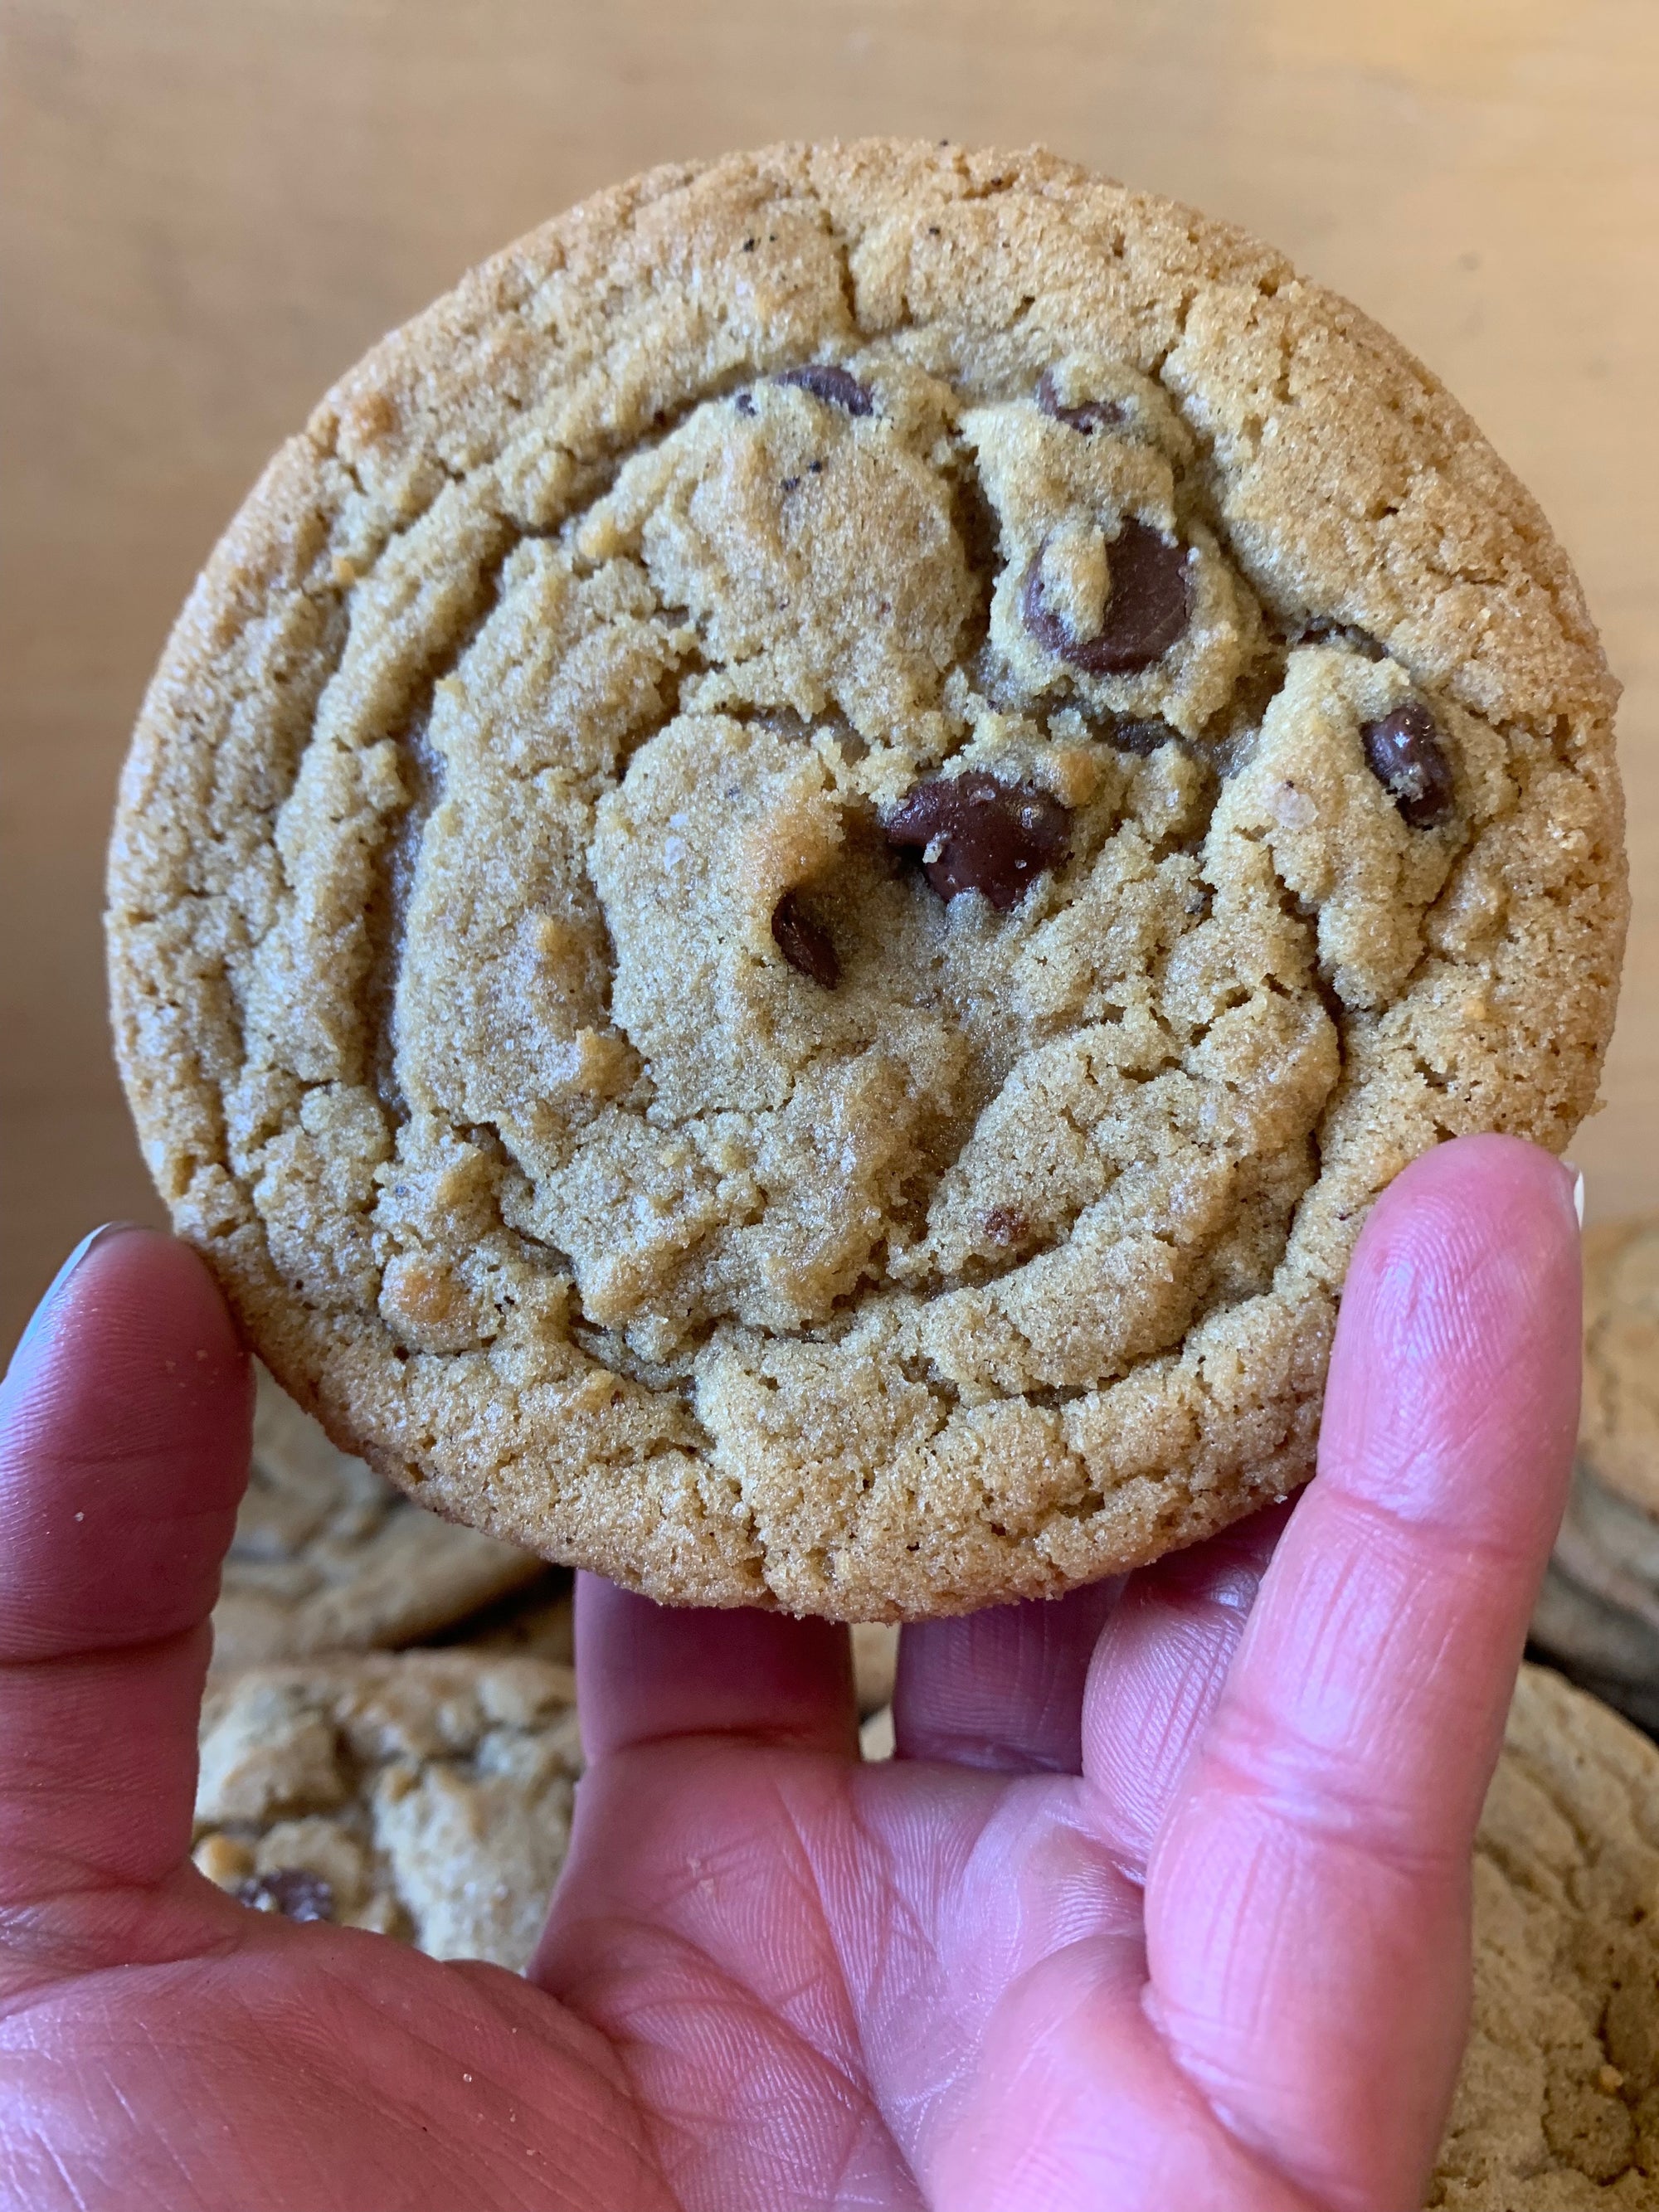 The O.G. Brown Butter Chocolate Chip Sea Salt Cookie